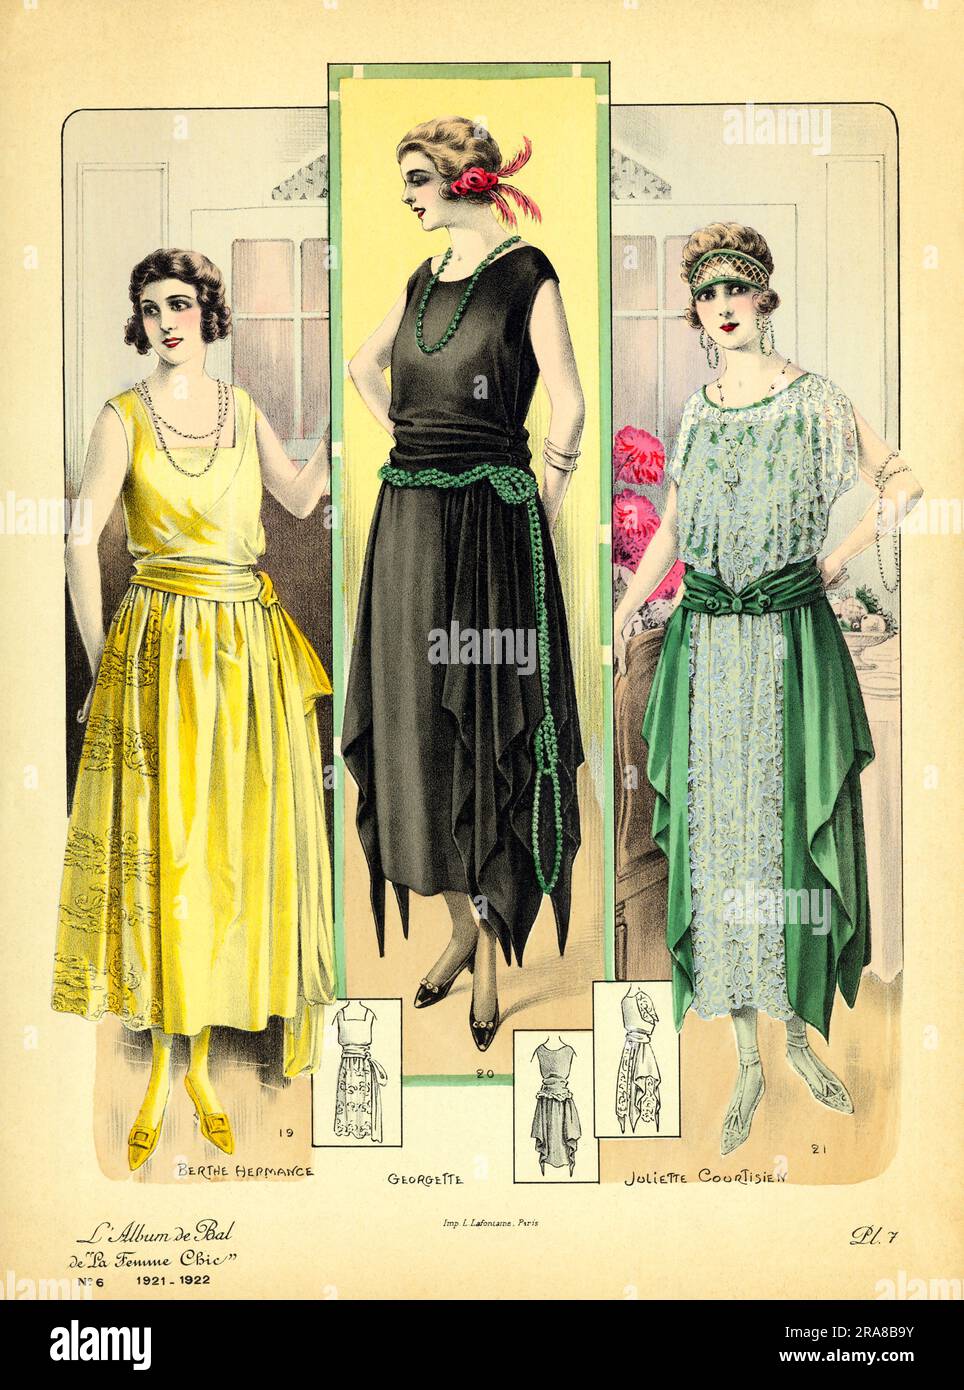 Paris, France:  1921 A lithographic plate of three fashionable women from a French fashion catalogue, 'De La Femme Chic'. Stock Photo